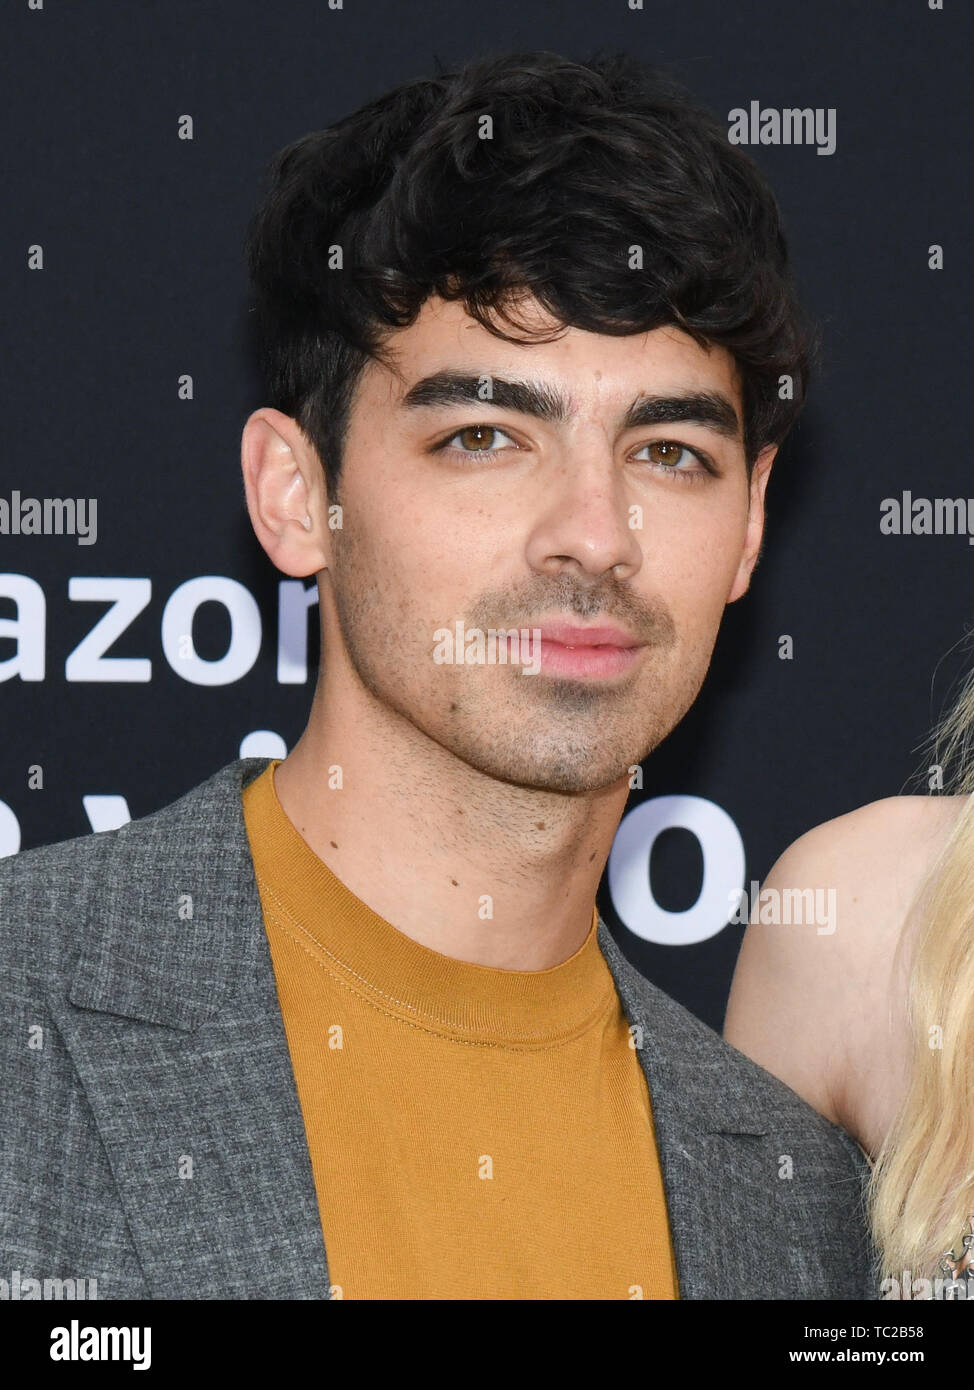 June 3, 2019 - Westwood, California, USA - 02, June 2019 - Westwood Village, California. Joe Jonas attends Premiere Of Amazon Prime Video's 'Chasing Happiness' at the Regency Village Bruin Theatre. (Credit Image: © Billy Bennight/ZUMA Wire) Stock Photo